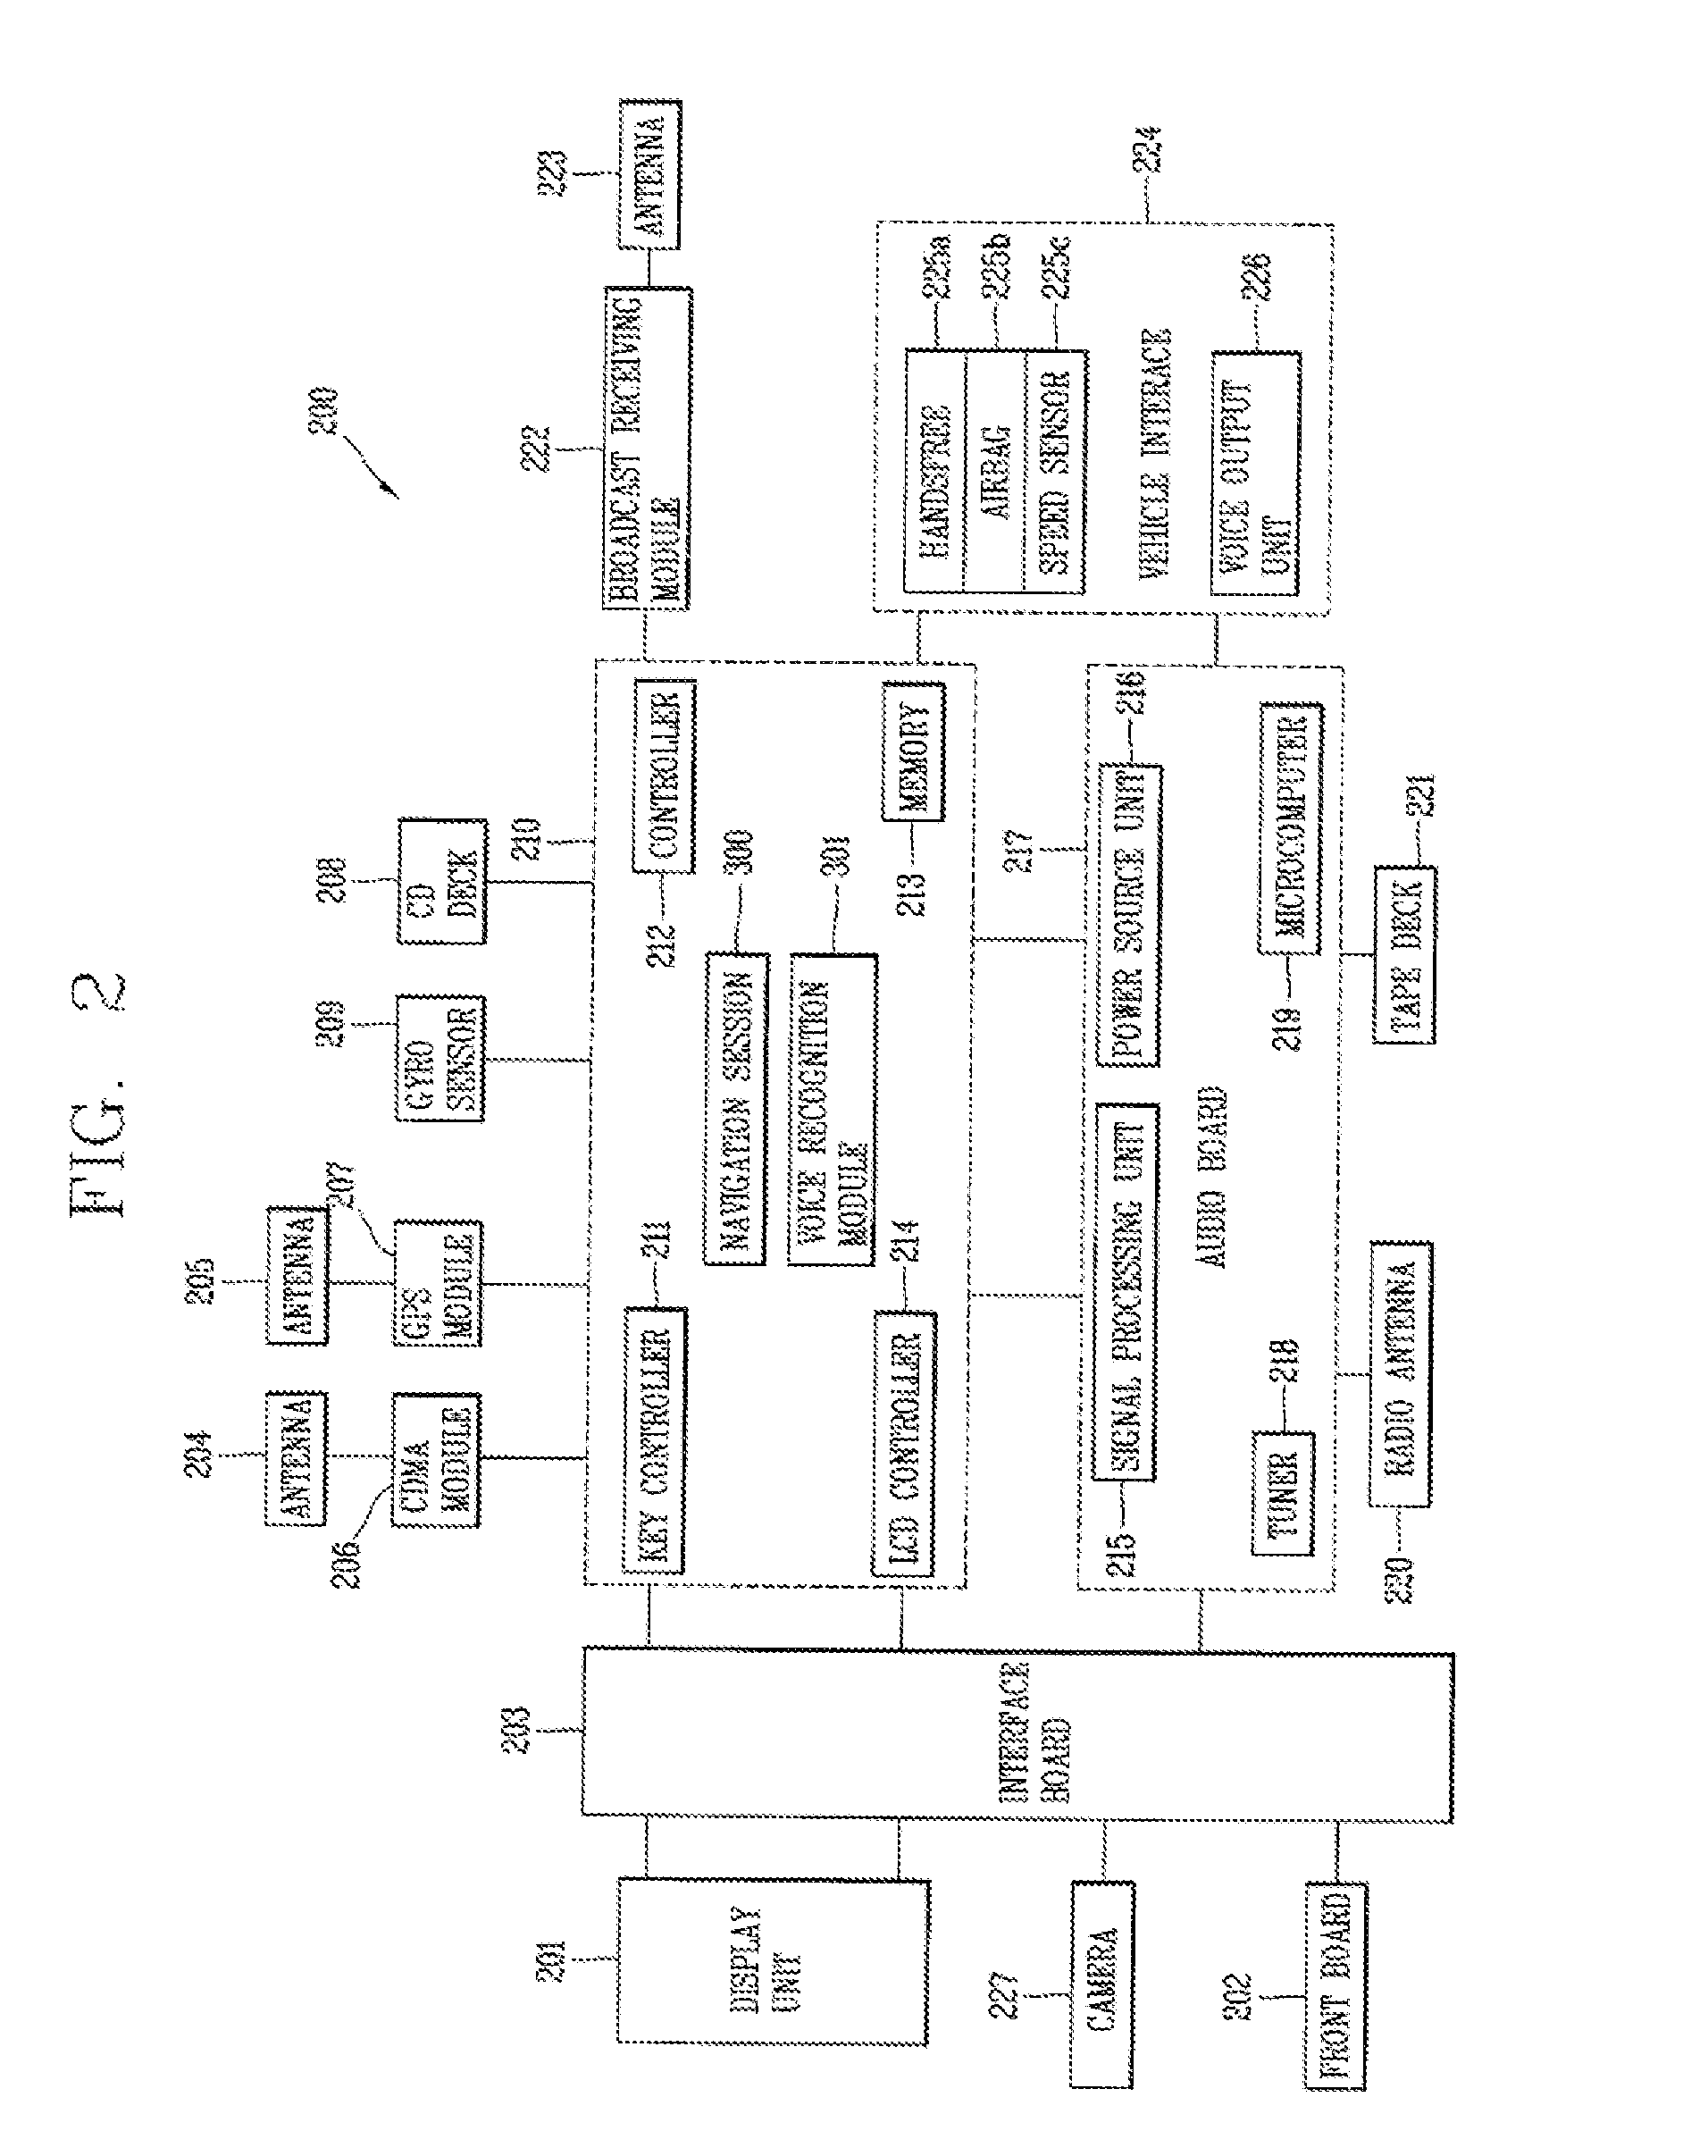 Content control apparatus and method thereof